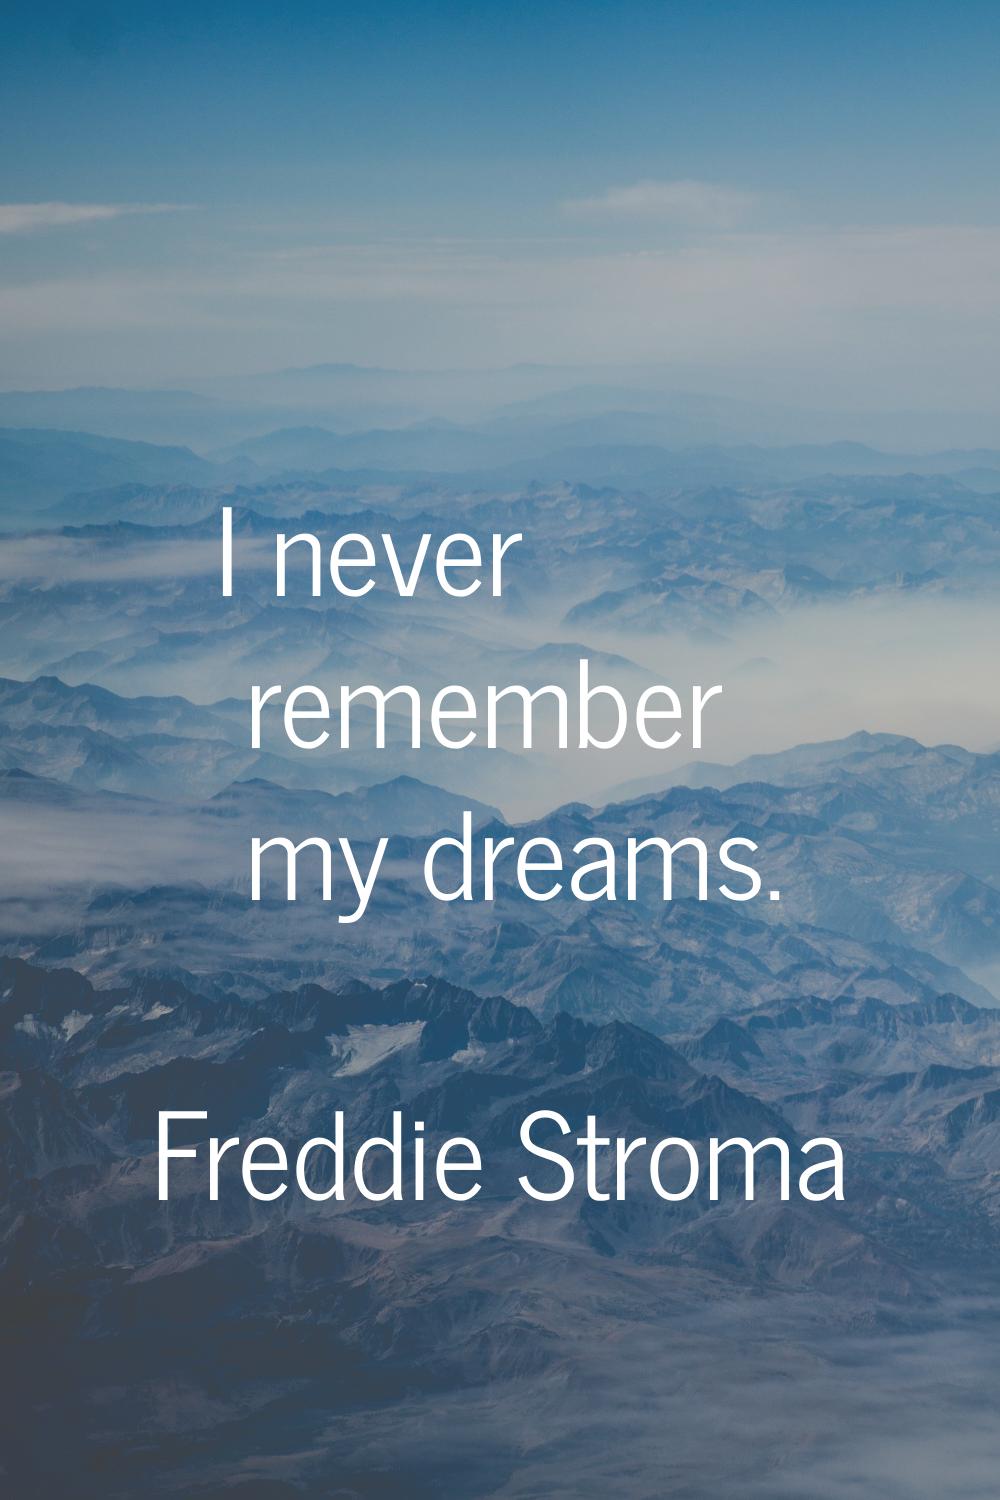 I never remember my dreams.